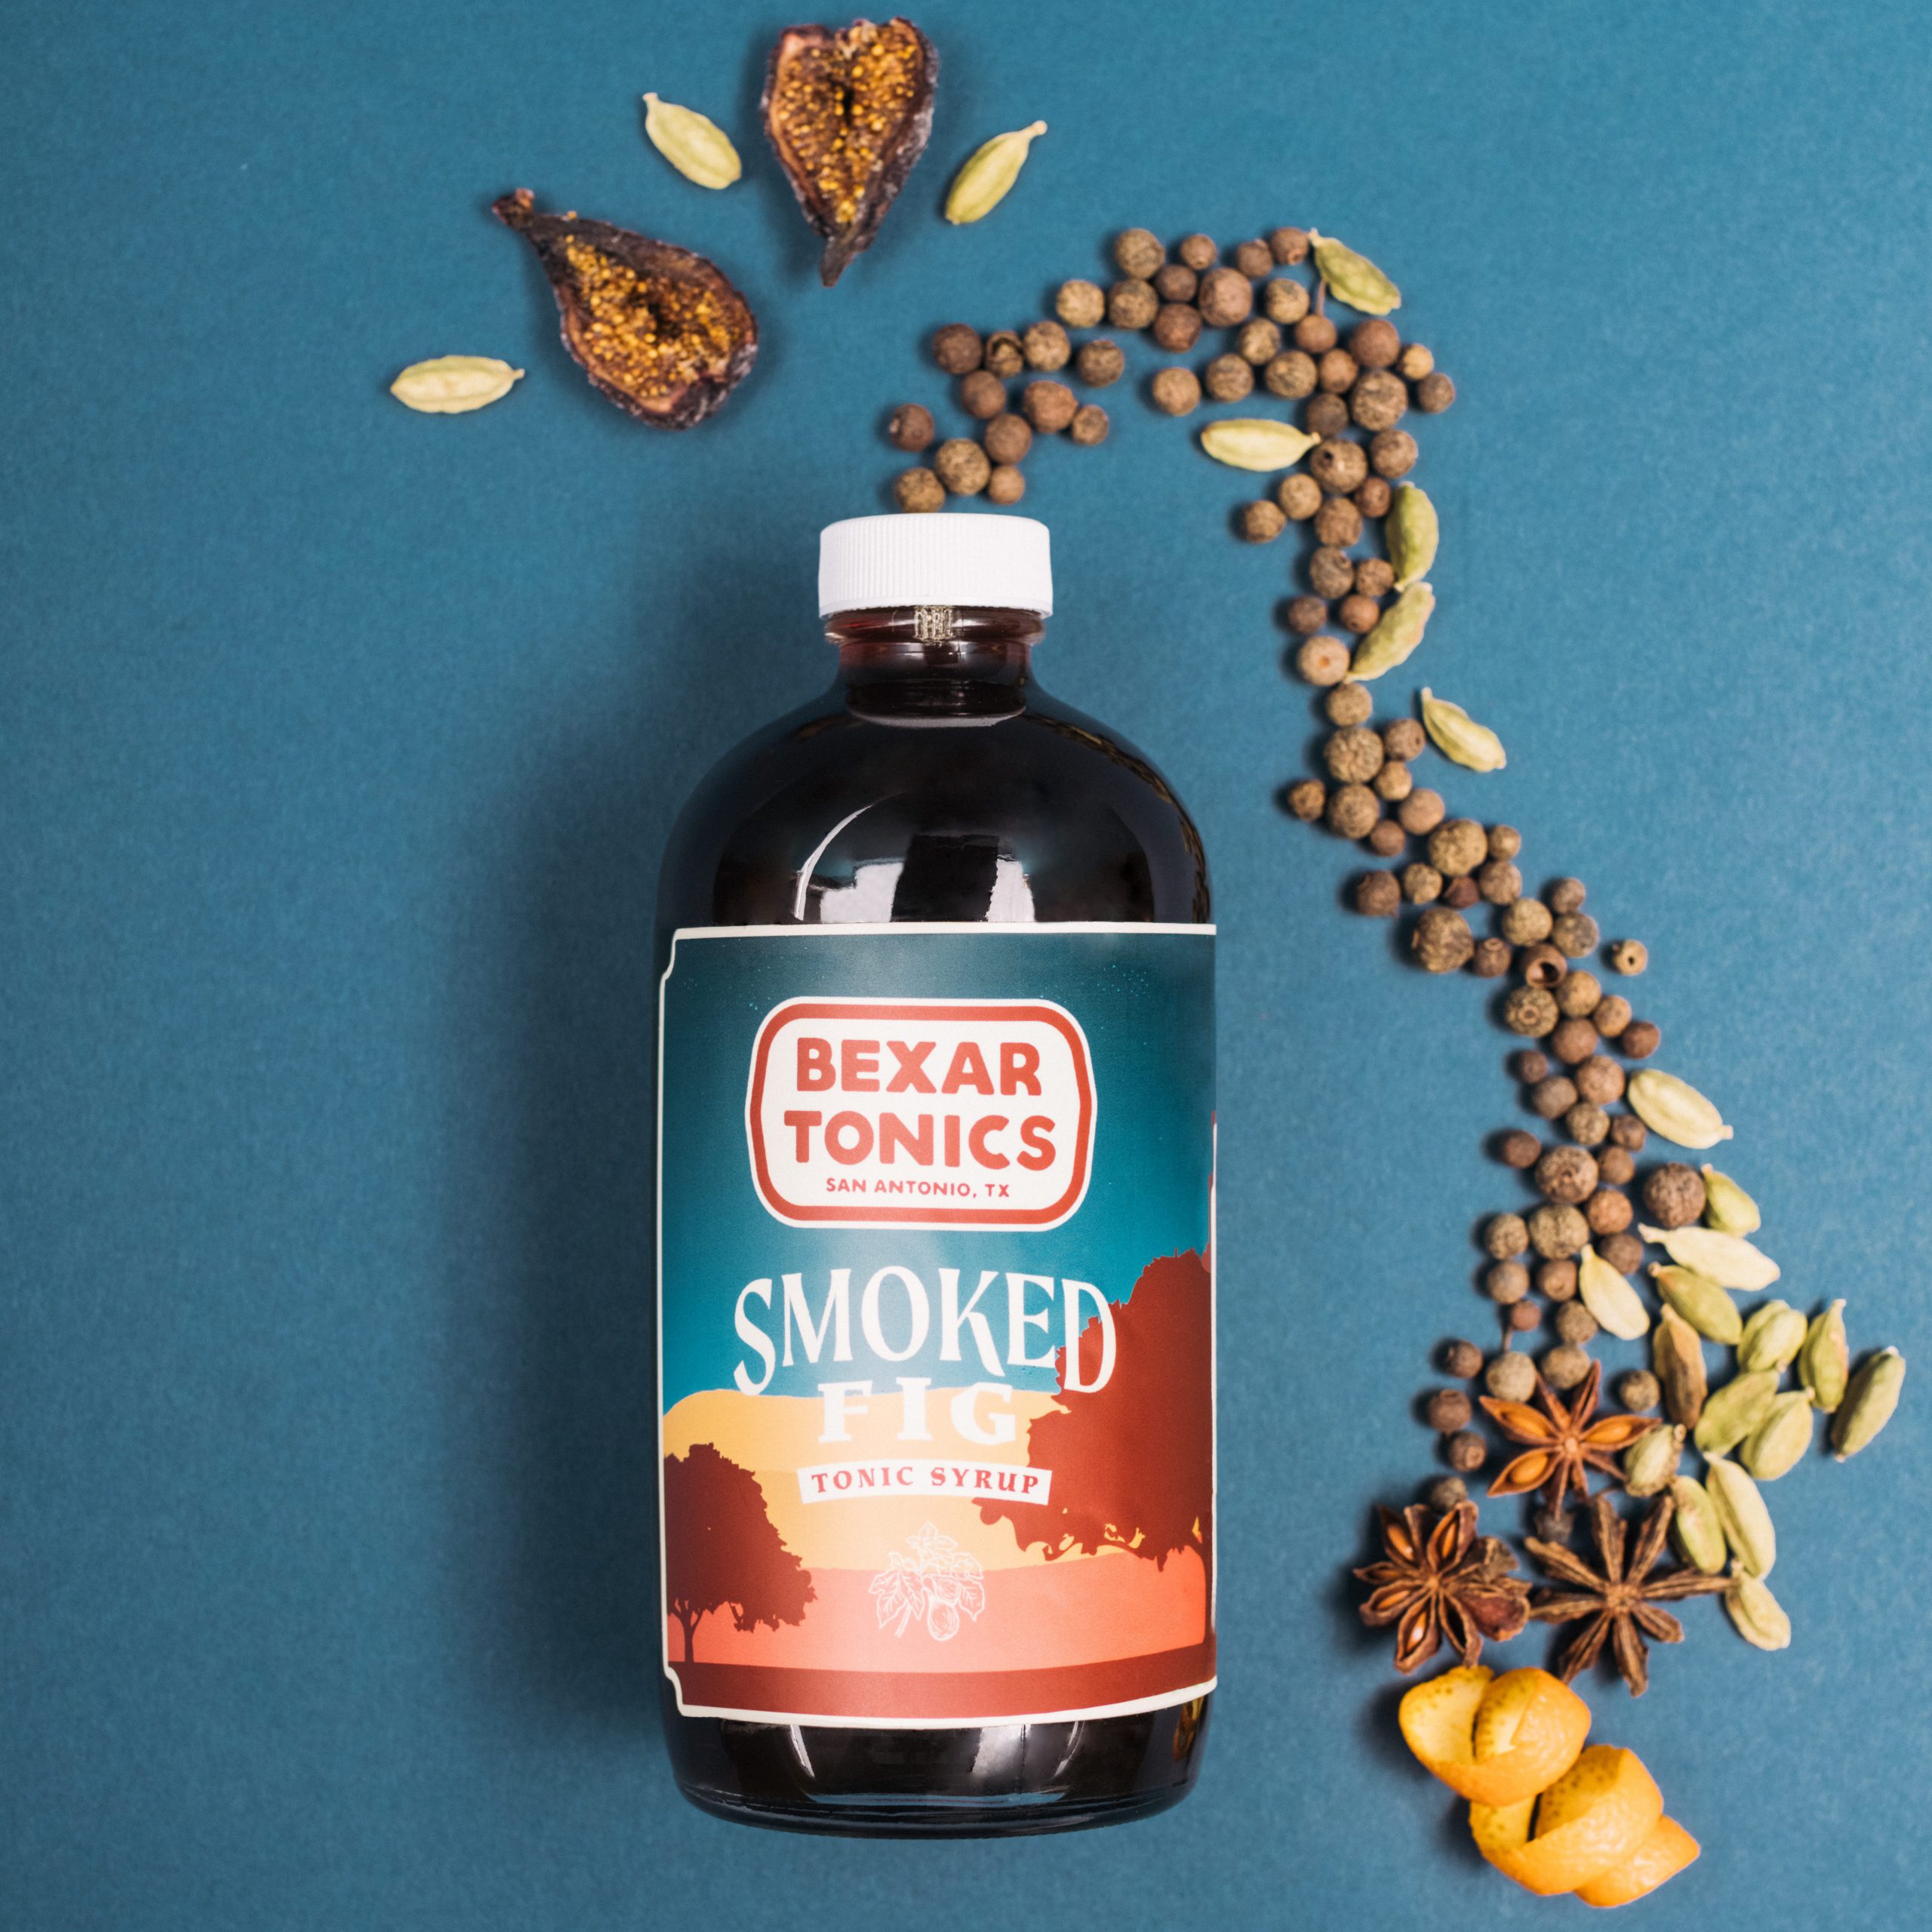 bottle smoked fig tonic syrup surrounded by ingredients